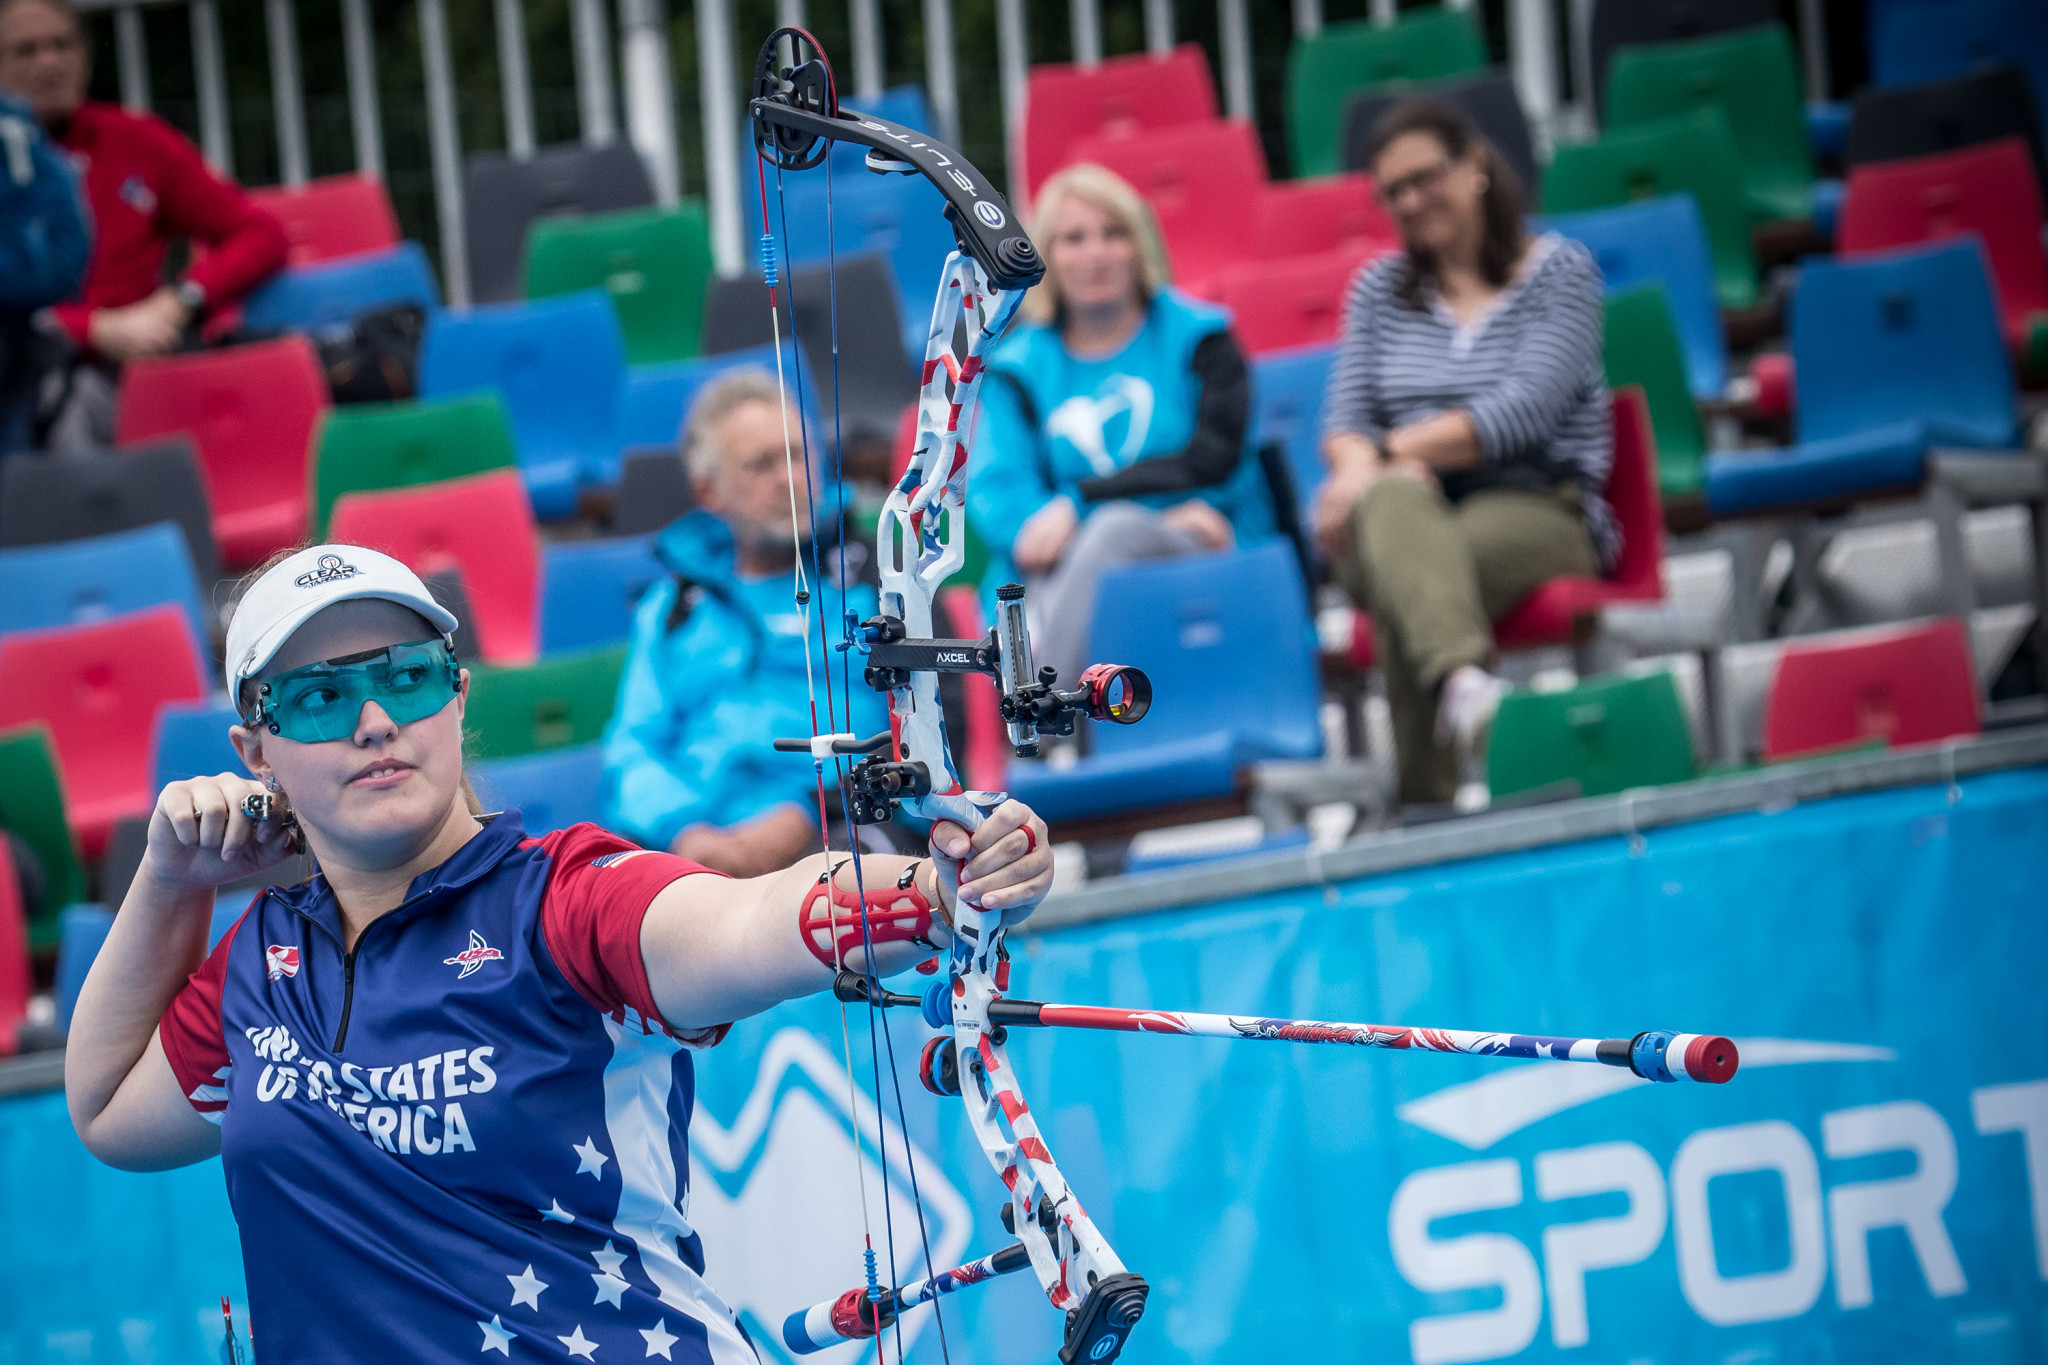 Paralympic champion and world number one shooter among competitors at World Archery Youth Championships